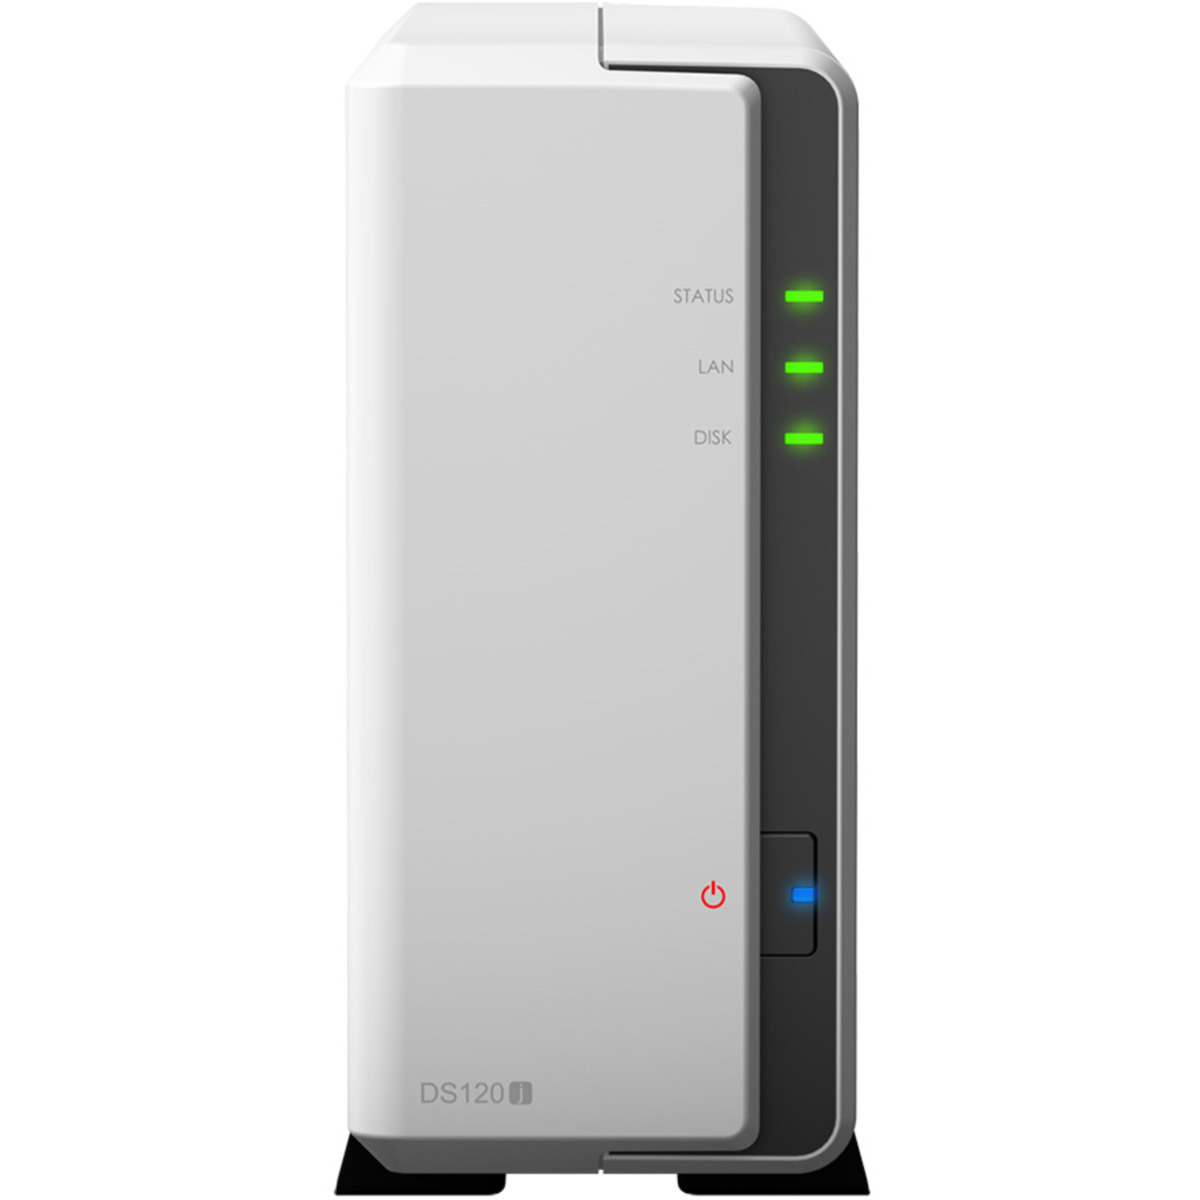 buy $288 Synology DiskStation DS120j 1tb Desktop NAS - Network Attached Storage Device 1x1000gb Samsung 870 QVO MZ-77Q1T0 2.5 SATA 6Gb/s SSD CONSUMER Class Drives Installed - Burn-In Tested - nas headquarters buy network attached storage server device das new raid-5 free shipping usa DiskStation DS120j